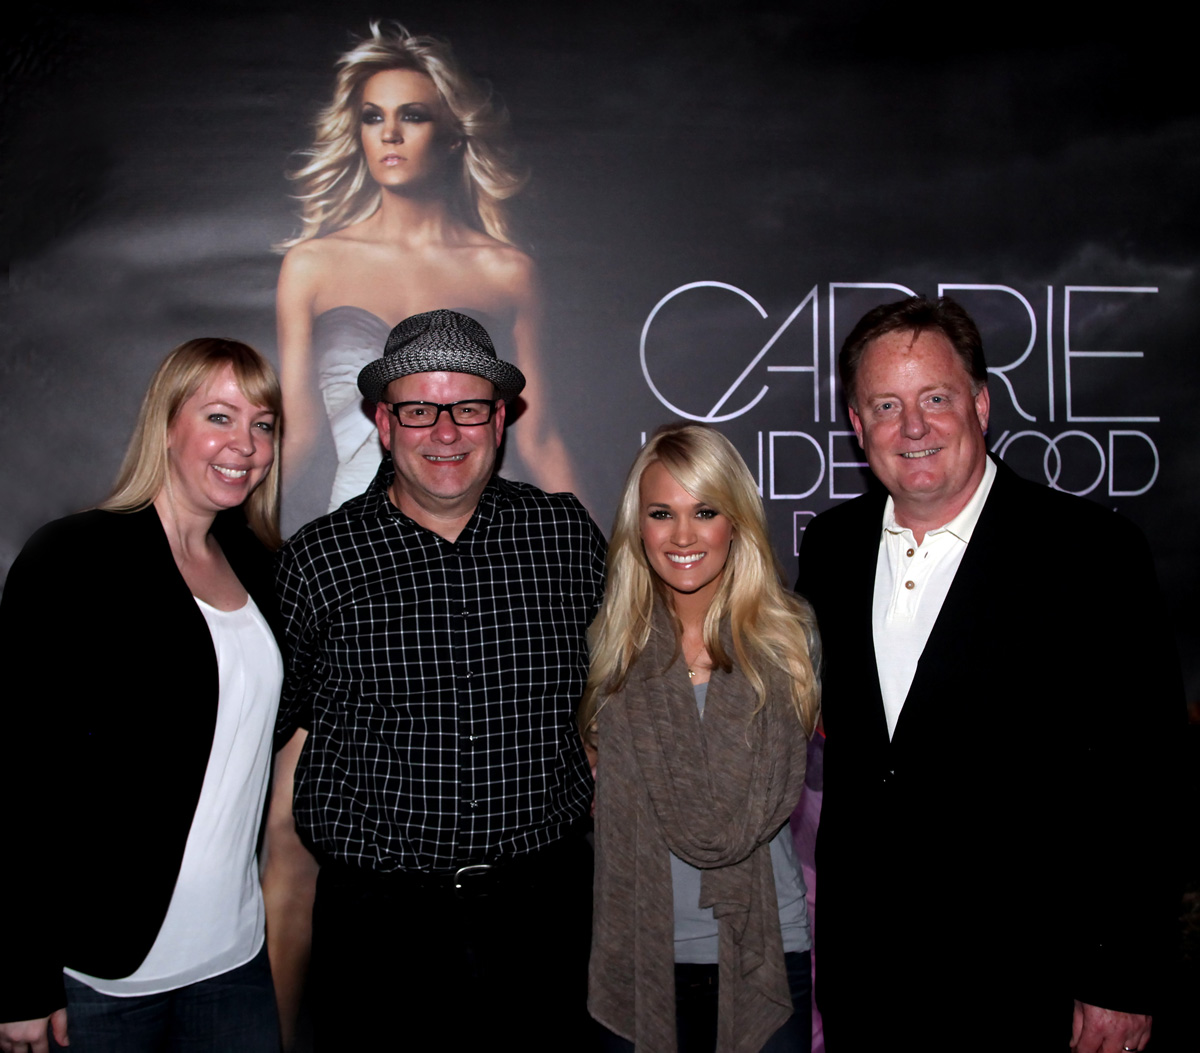 Carrie Underwood hosts listening party